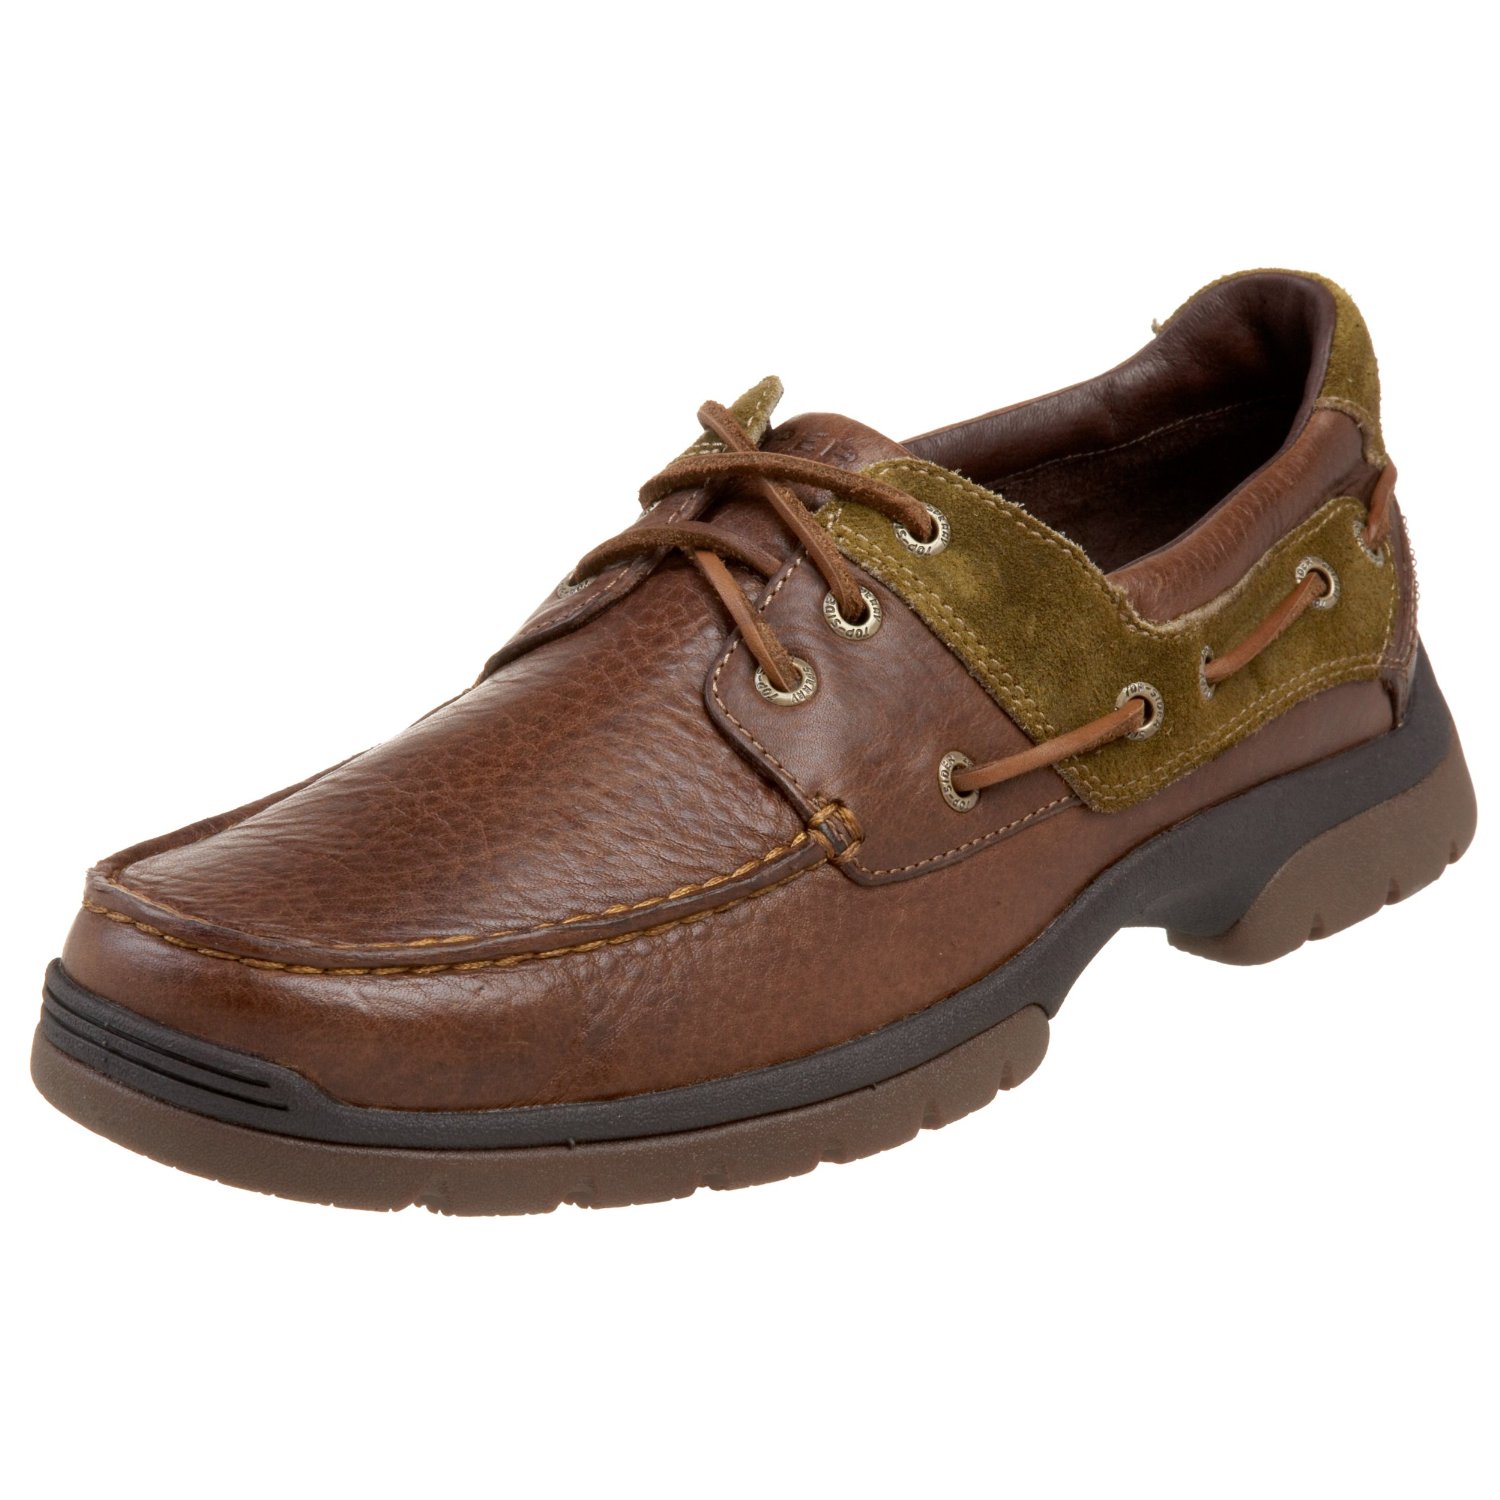 Sperry Topsider Sperry Topsider Mens Nautical Lug Boat Shoe in Brown 